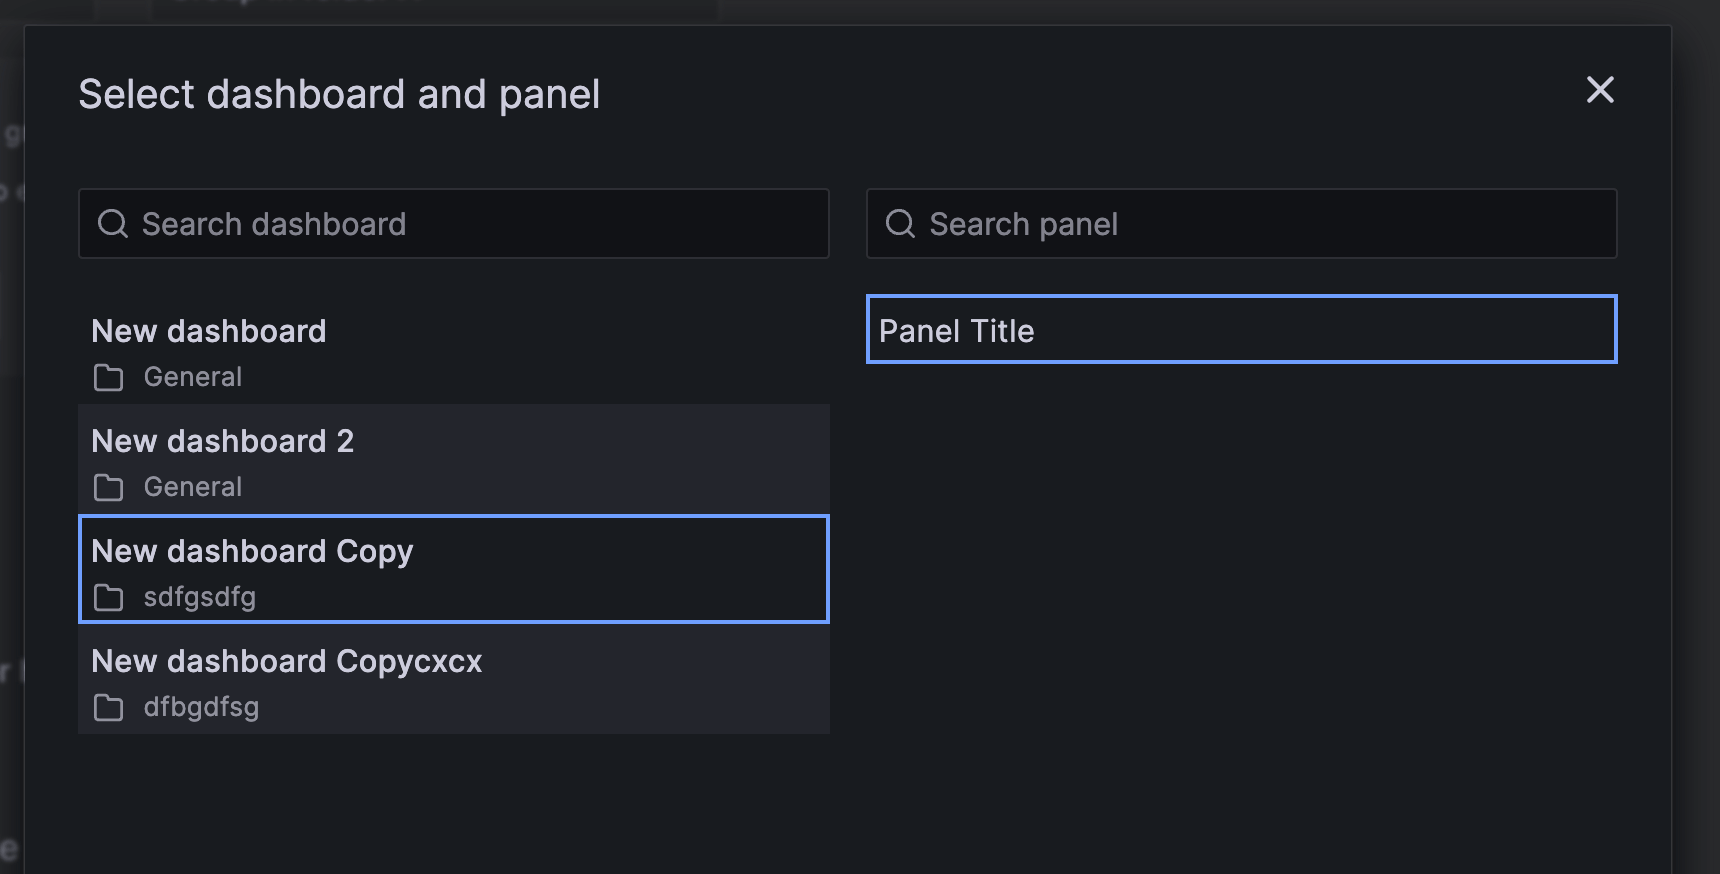 Screenshot showing dropdown menus for dashboards and panels in rule form